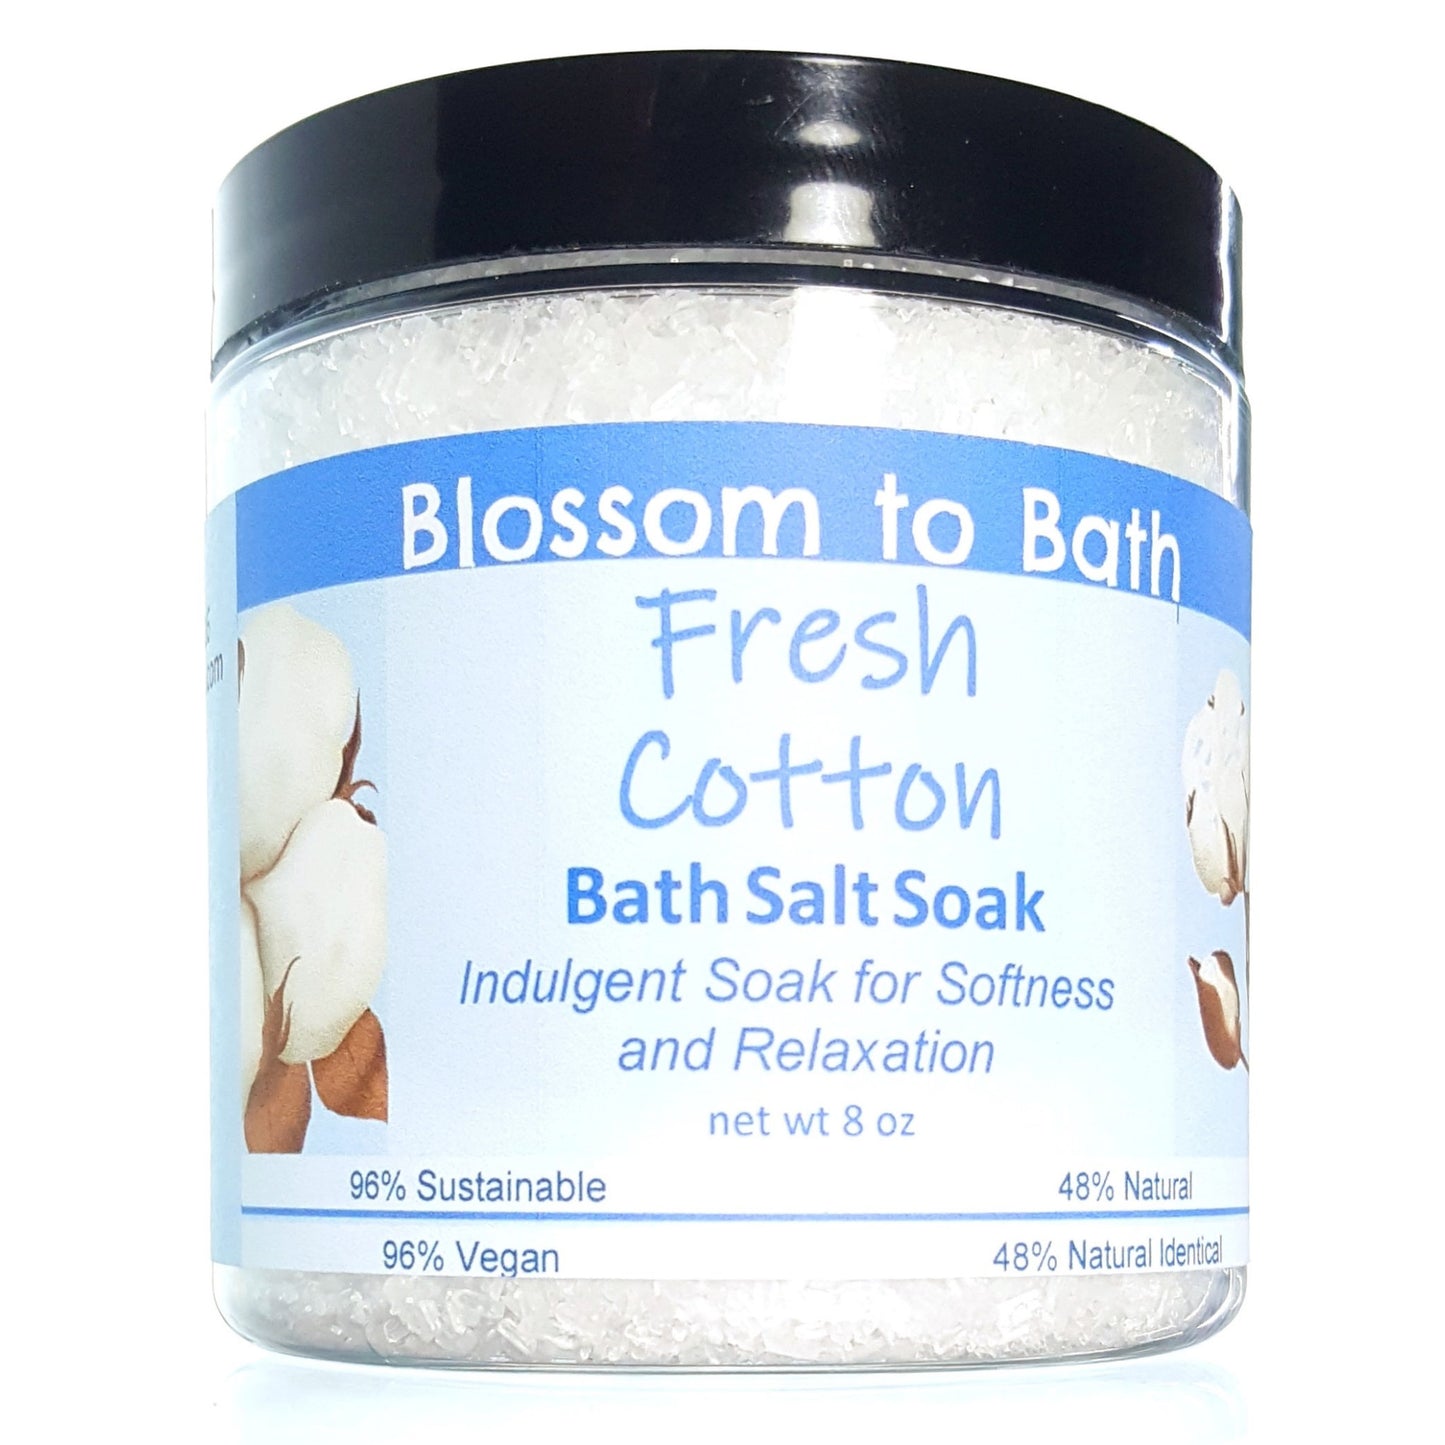 Buy Blossom to Bath Fresh Cotton Bath Salt Soak from Flowersong Soap Studio.  Scented epsom salts for a luxurious soaking experience  Smells like clean sheets drying in a breeze of spring blossoms.